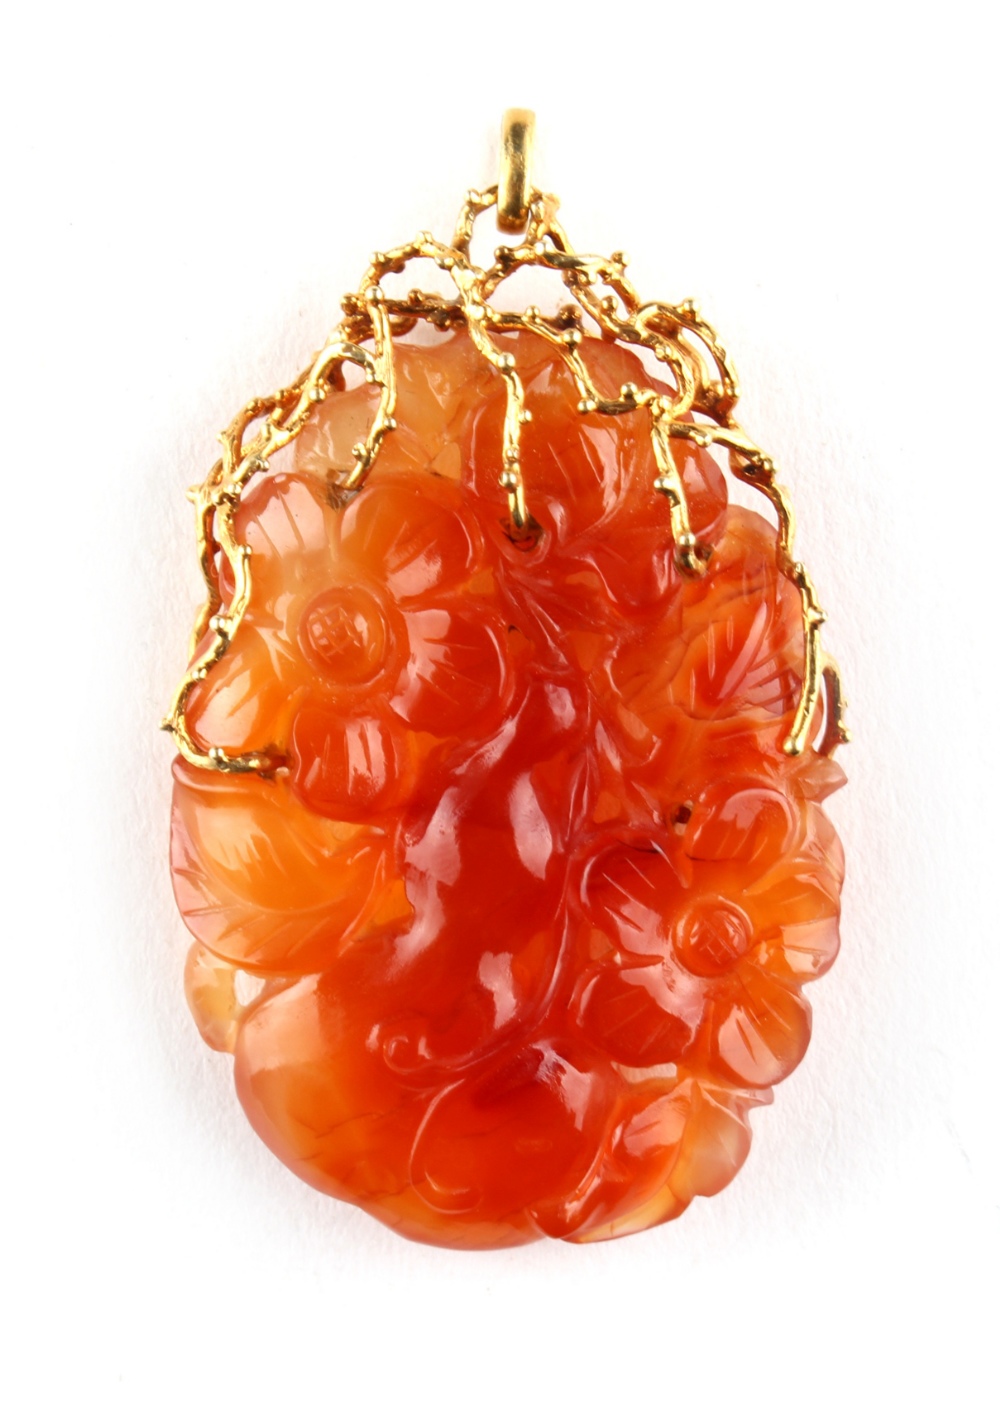 A large 14ct yellow gold mounted carved carnelian pendant modelled as a gourd & leaves, 2.45ins. (